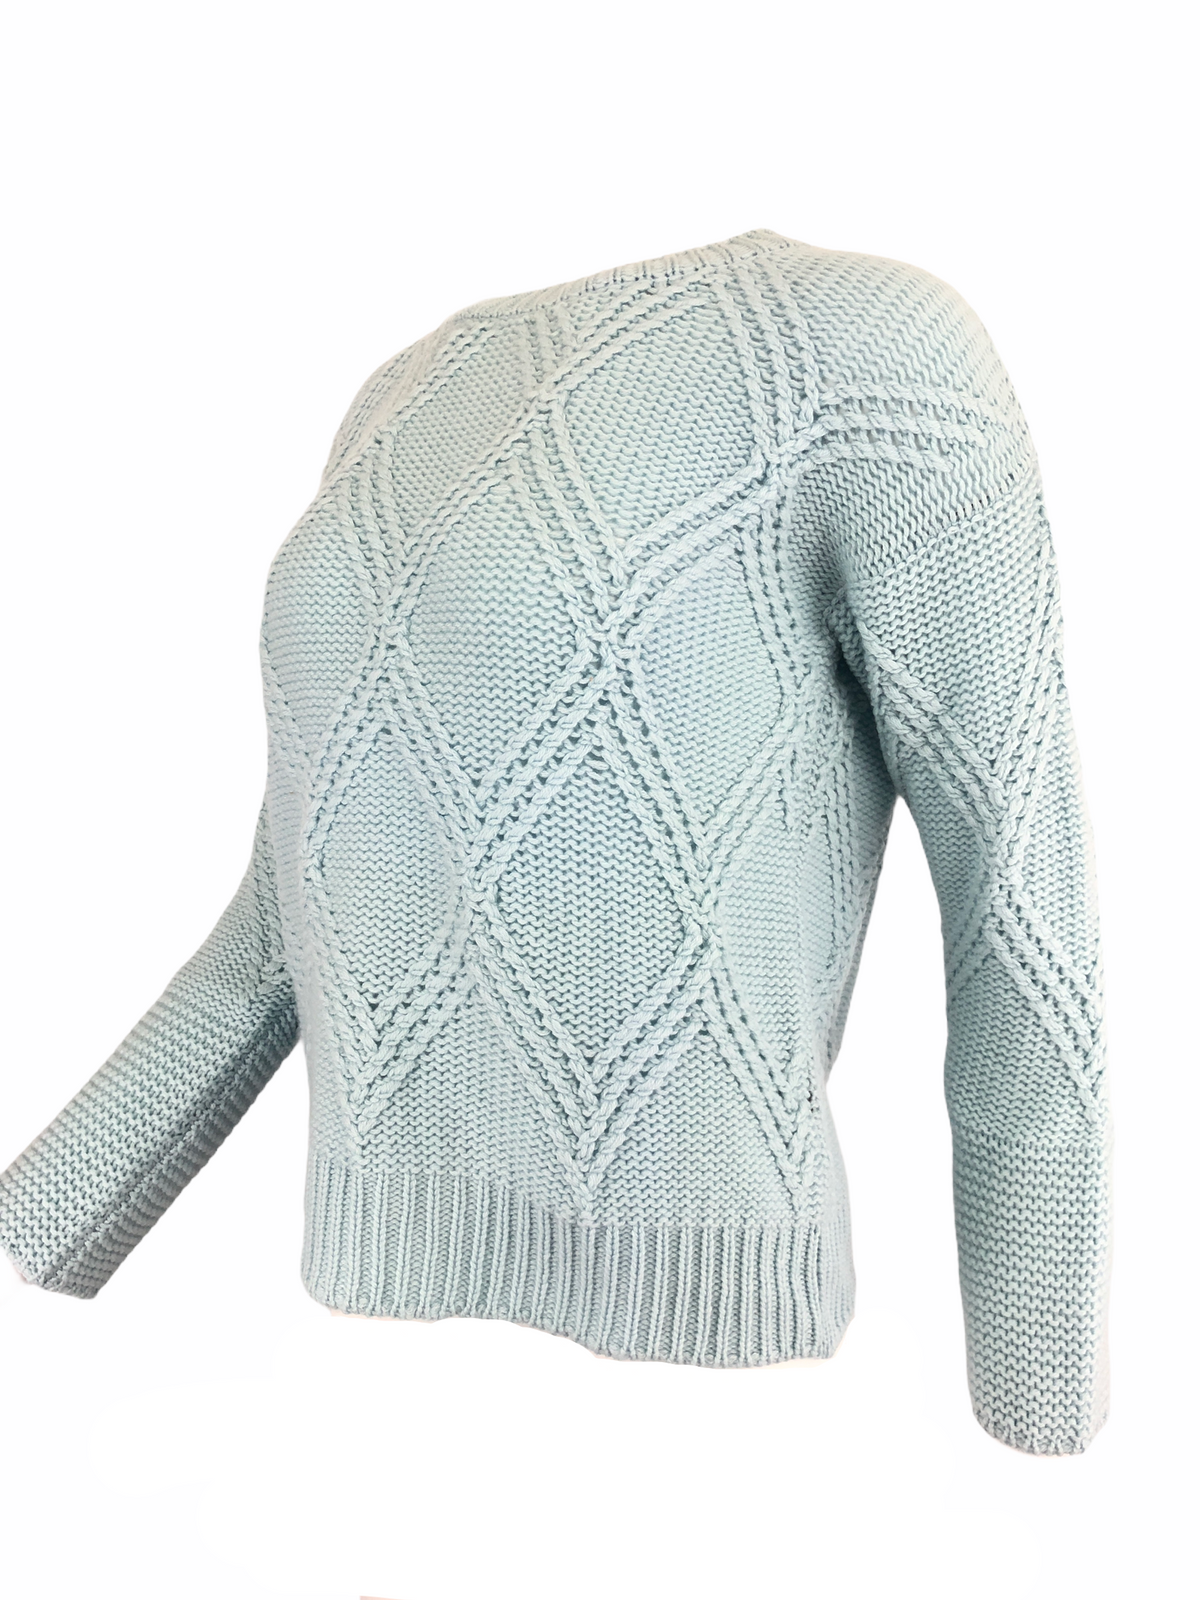 BRUNO MANETTI CABLE KNIT CASHMERE SWEATER - ICE BLUE